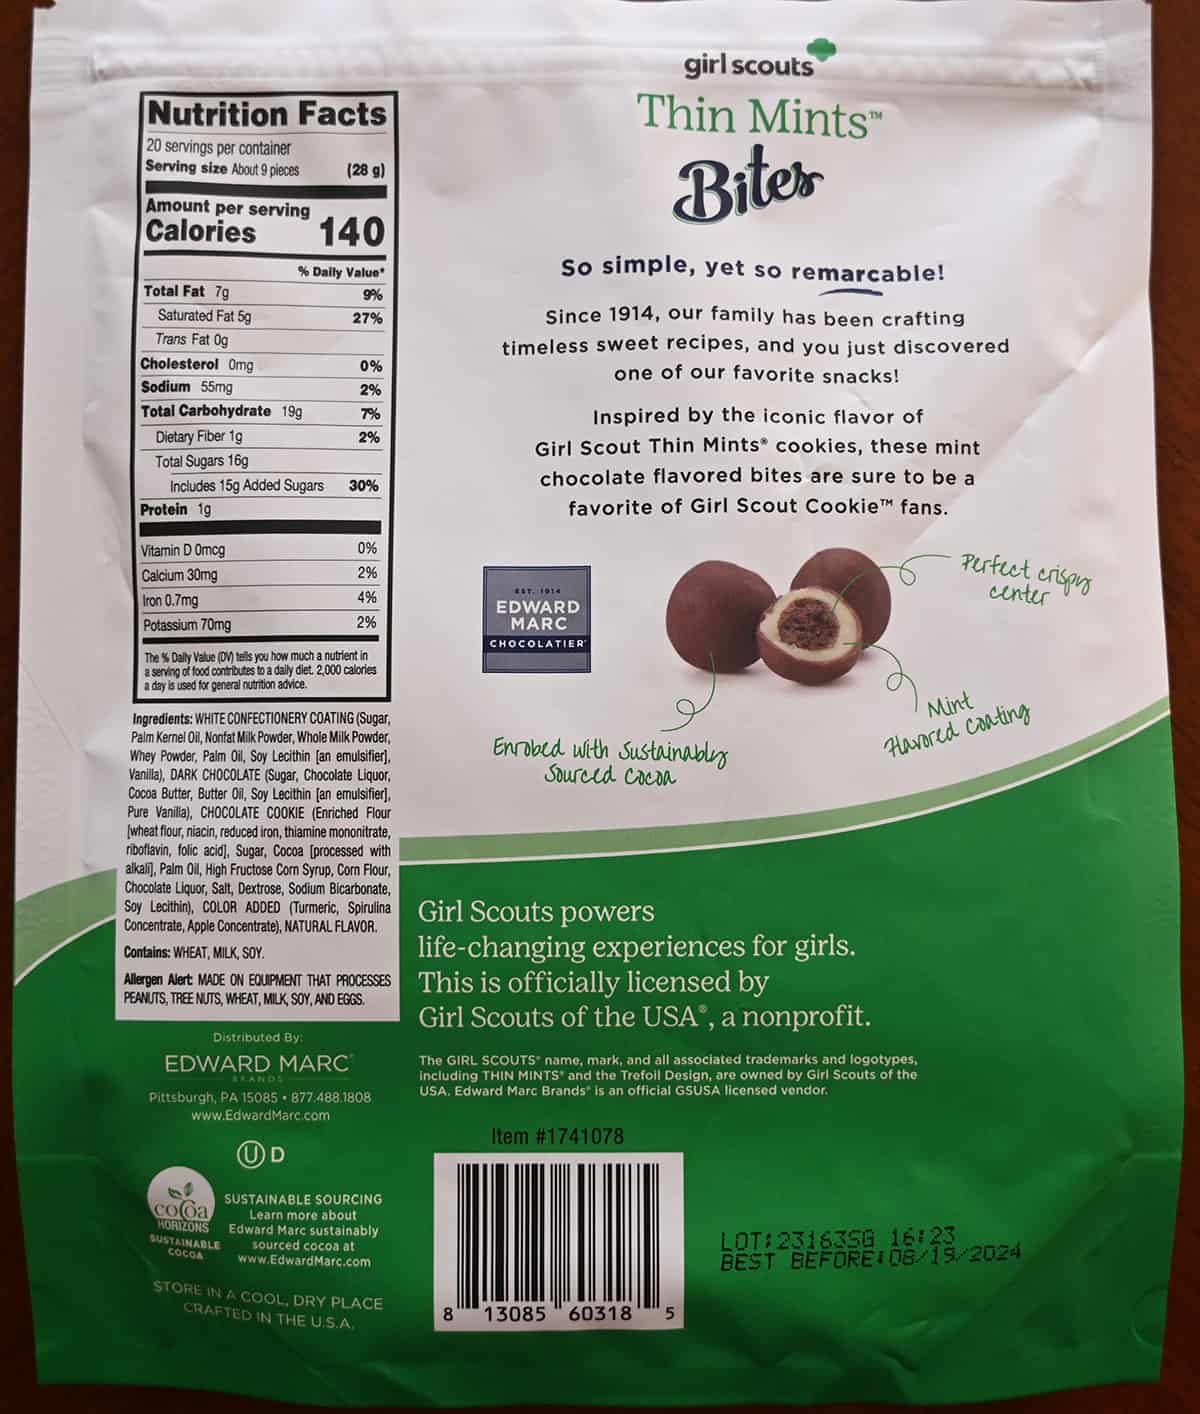 Image of the back of bag for the thin mints bites. Showing the nutrition facts, ingredients and product description.